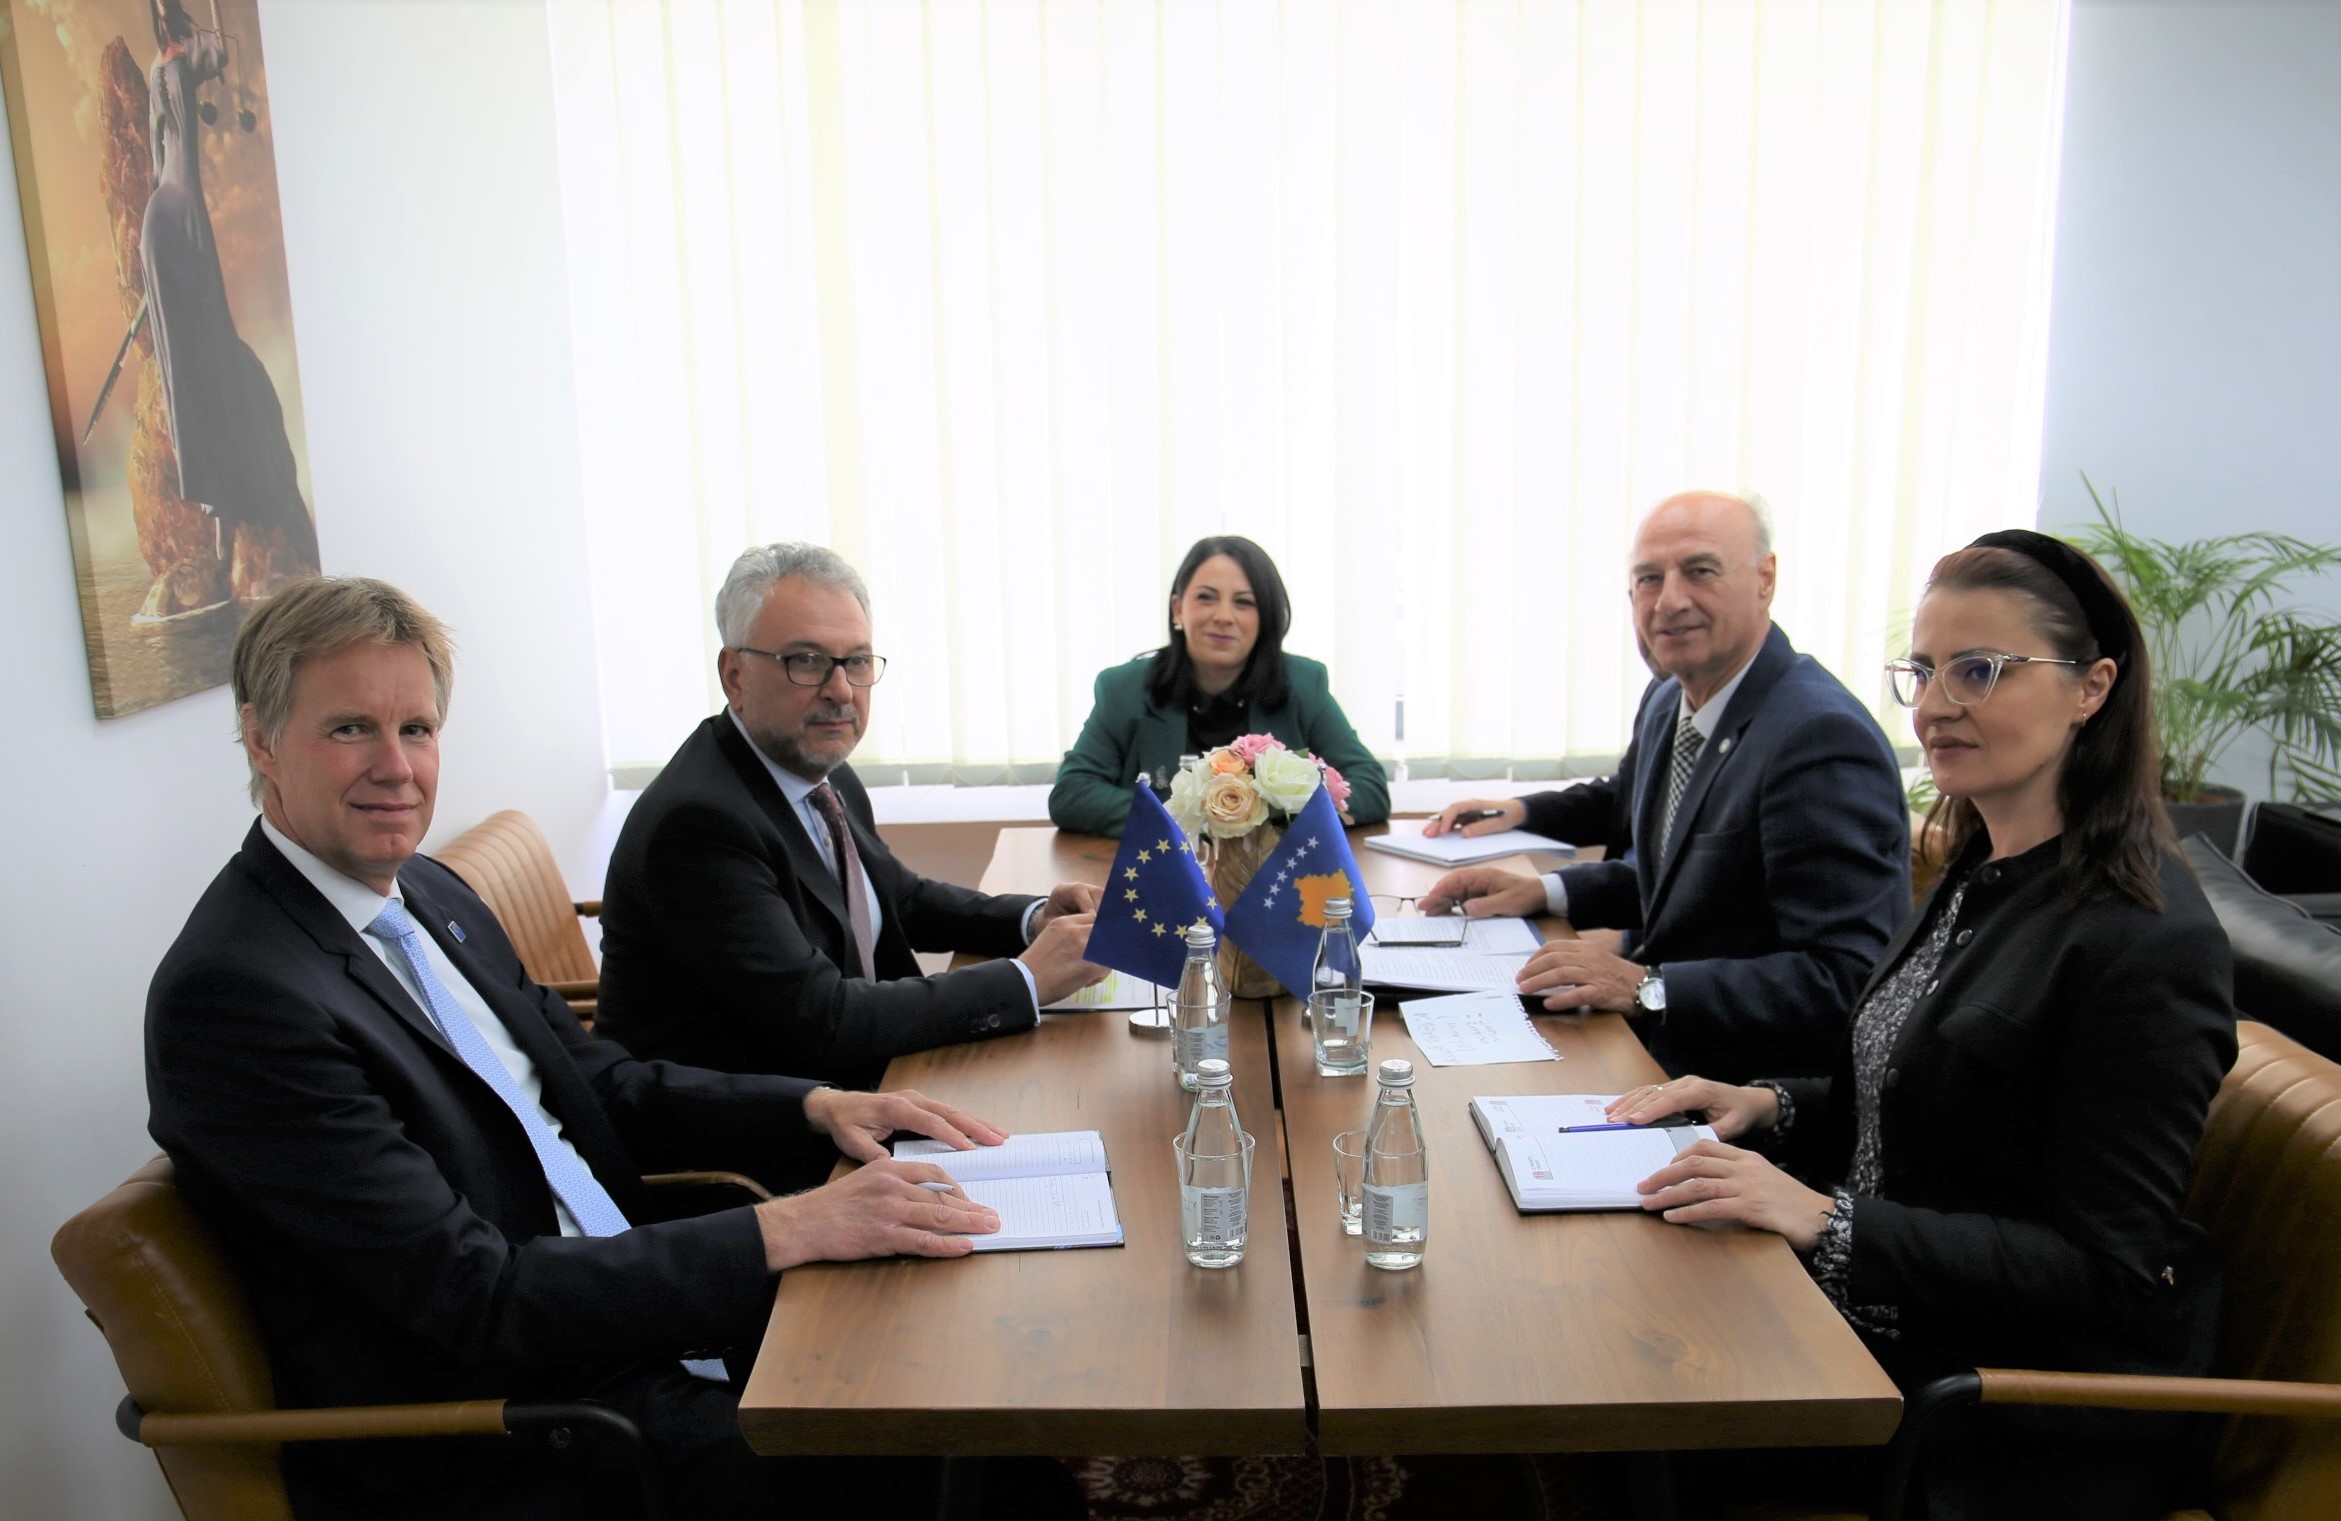 Chairman Maloku received the new head of EULEX, Giovanni Barbano, at the meeting